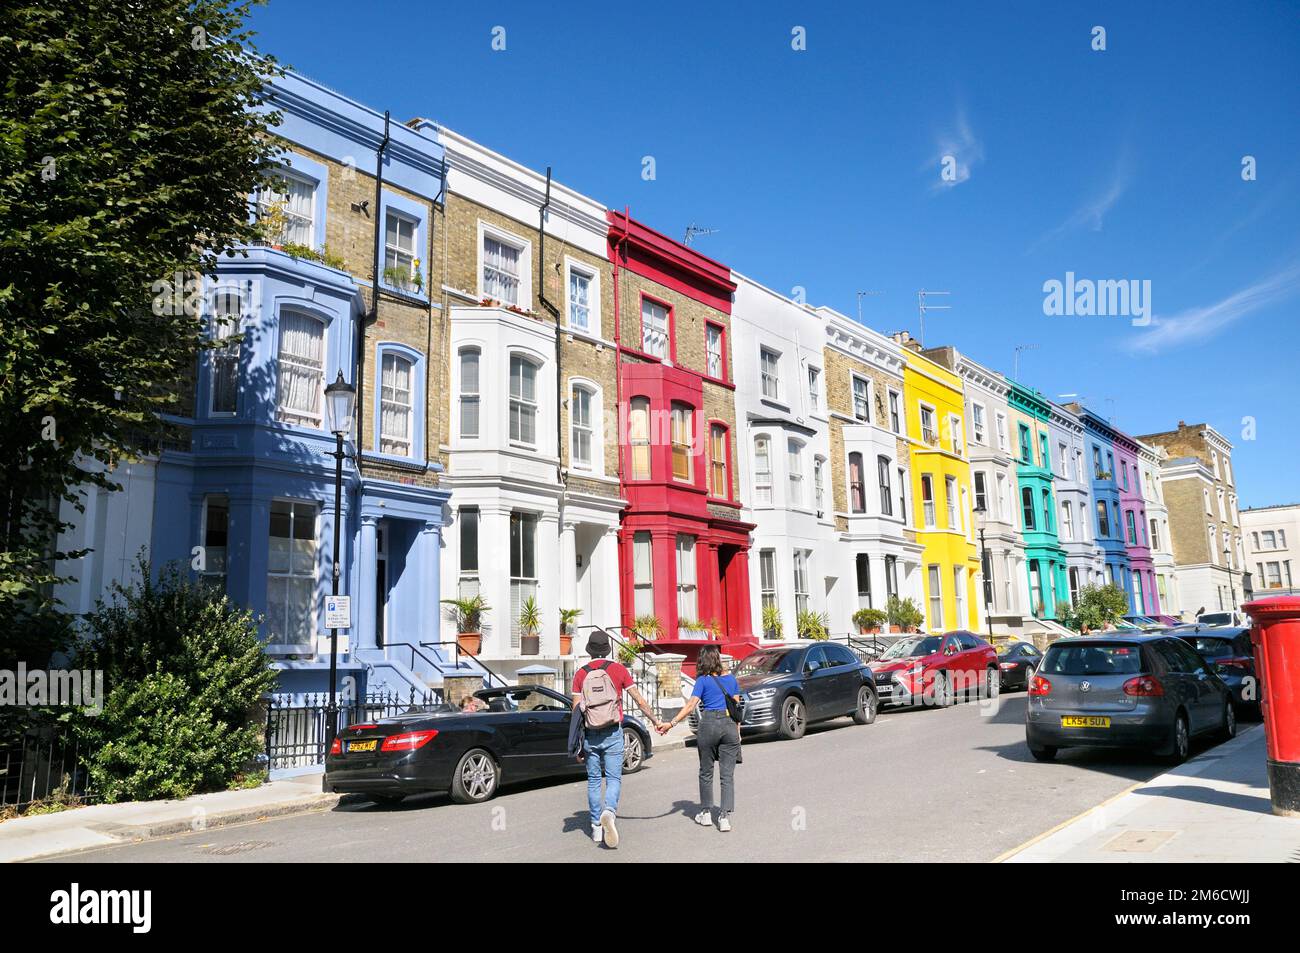 Young couple walking holding hands crossing a road in a street with colourful row of terraced houses on a sunny day, Notting Hill, London, England, UK Stock Photo